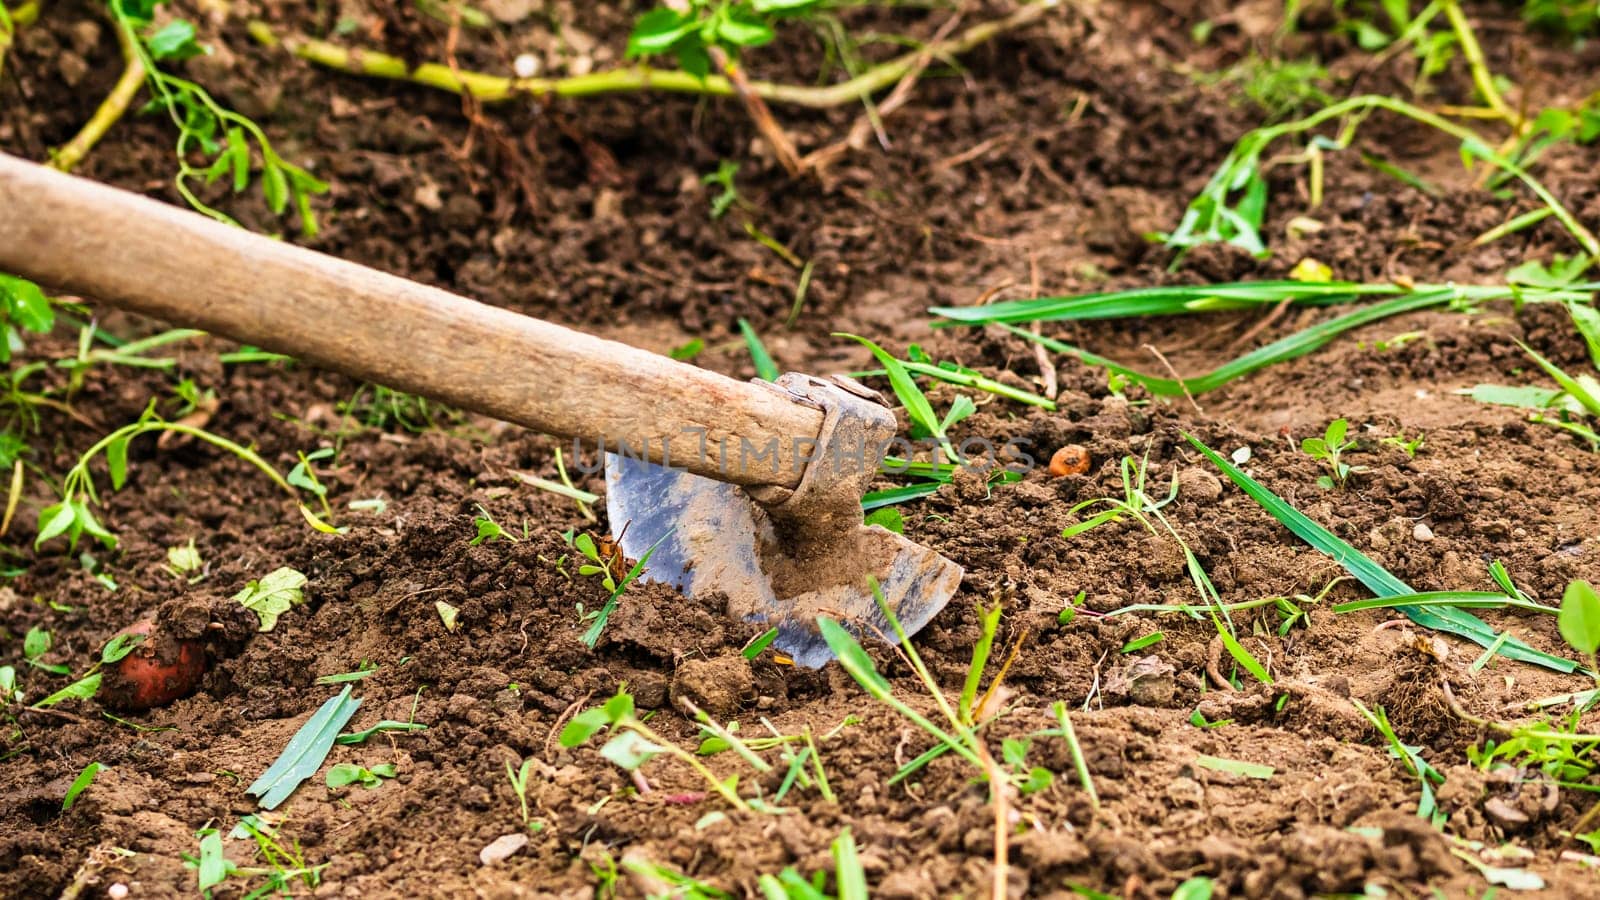 Close up of hoe tool for digging isolated in garden on the ground. by vladispas